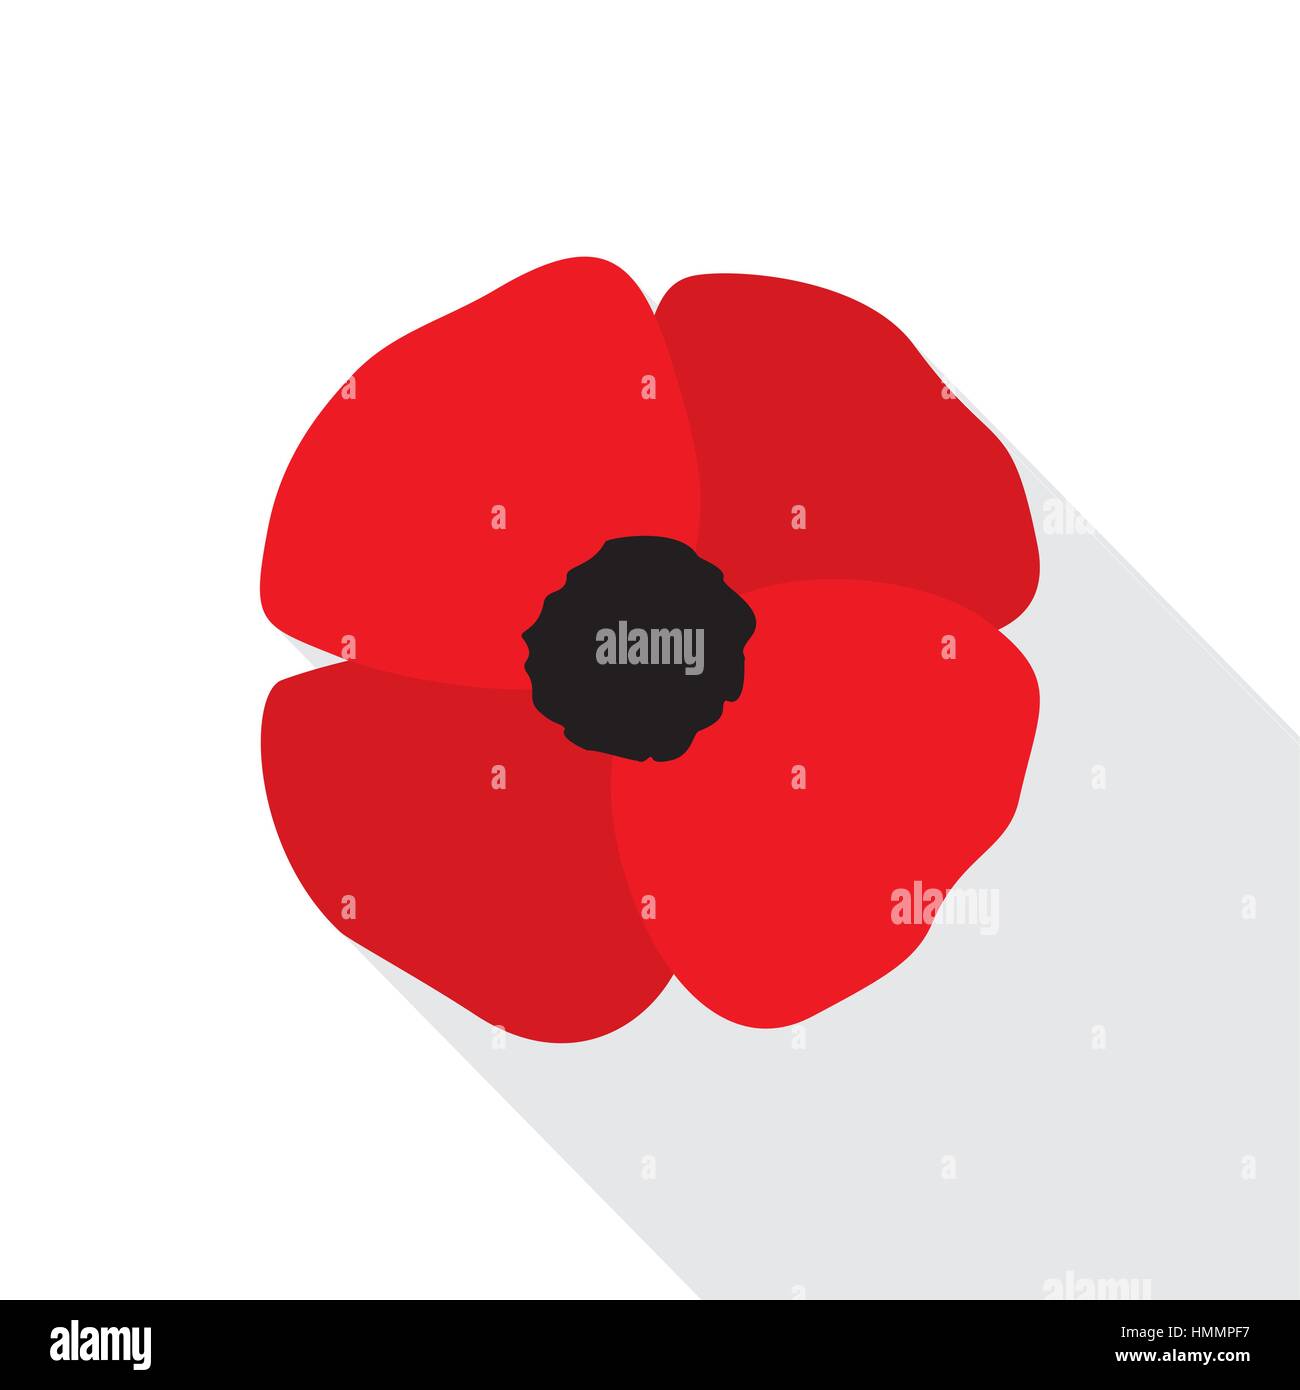 Red poppy flat icon. Stylized flower symbol. Vector illustration in EPS8 format. Stock Vector